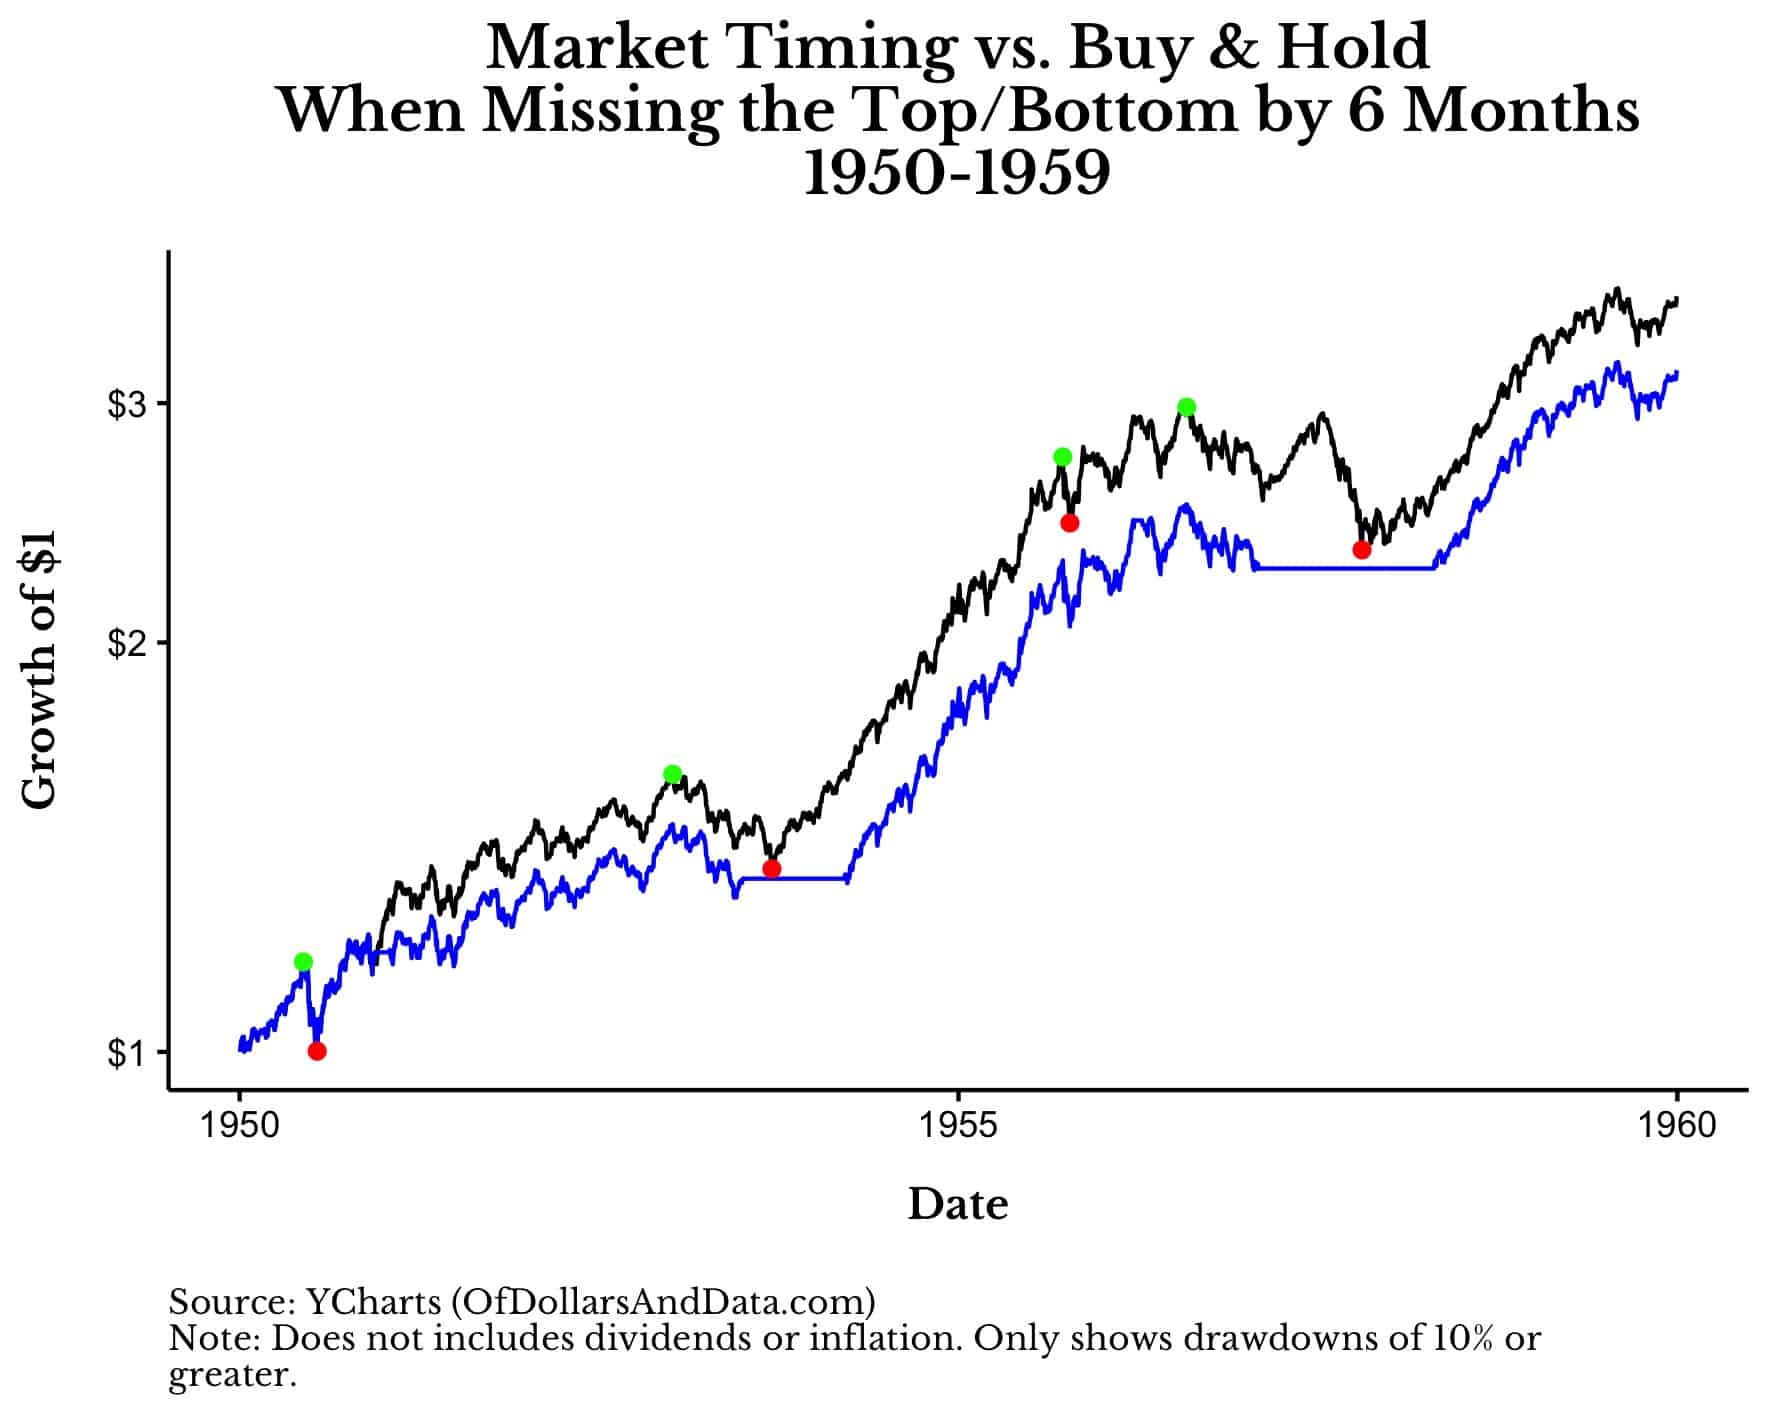 Market timing vs Buy and Hold when missing the top/bottom by 6 months, 1950-1959